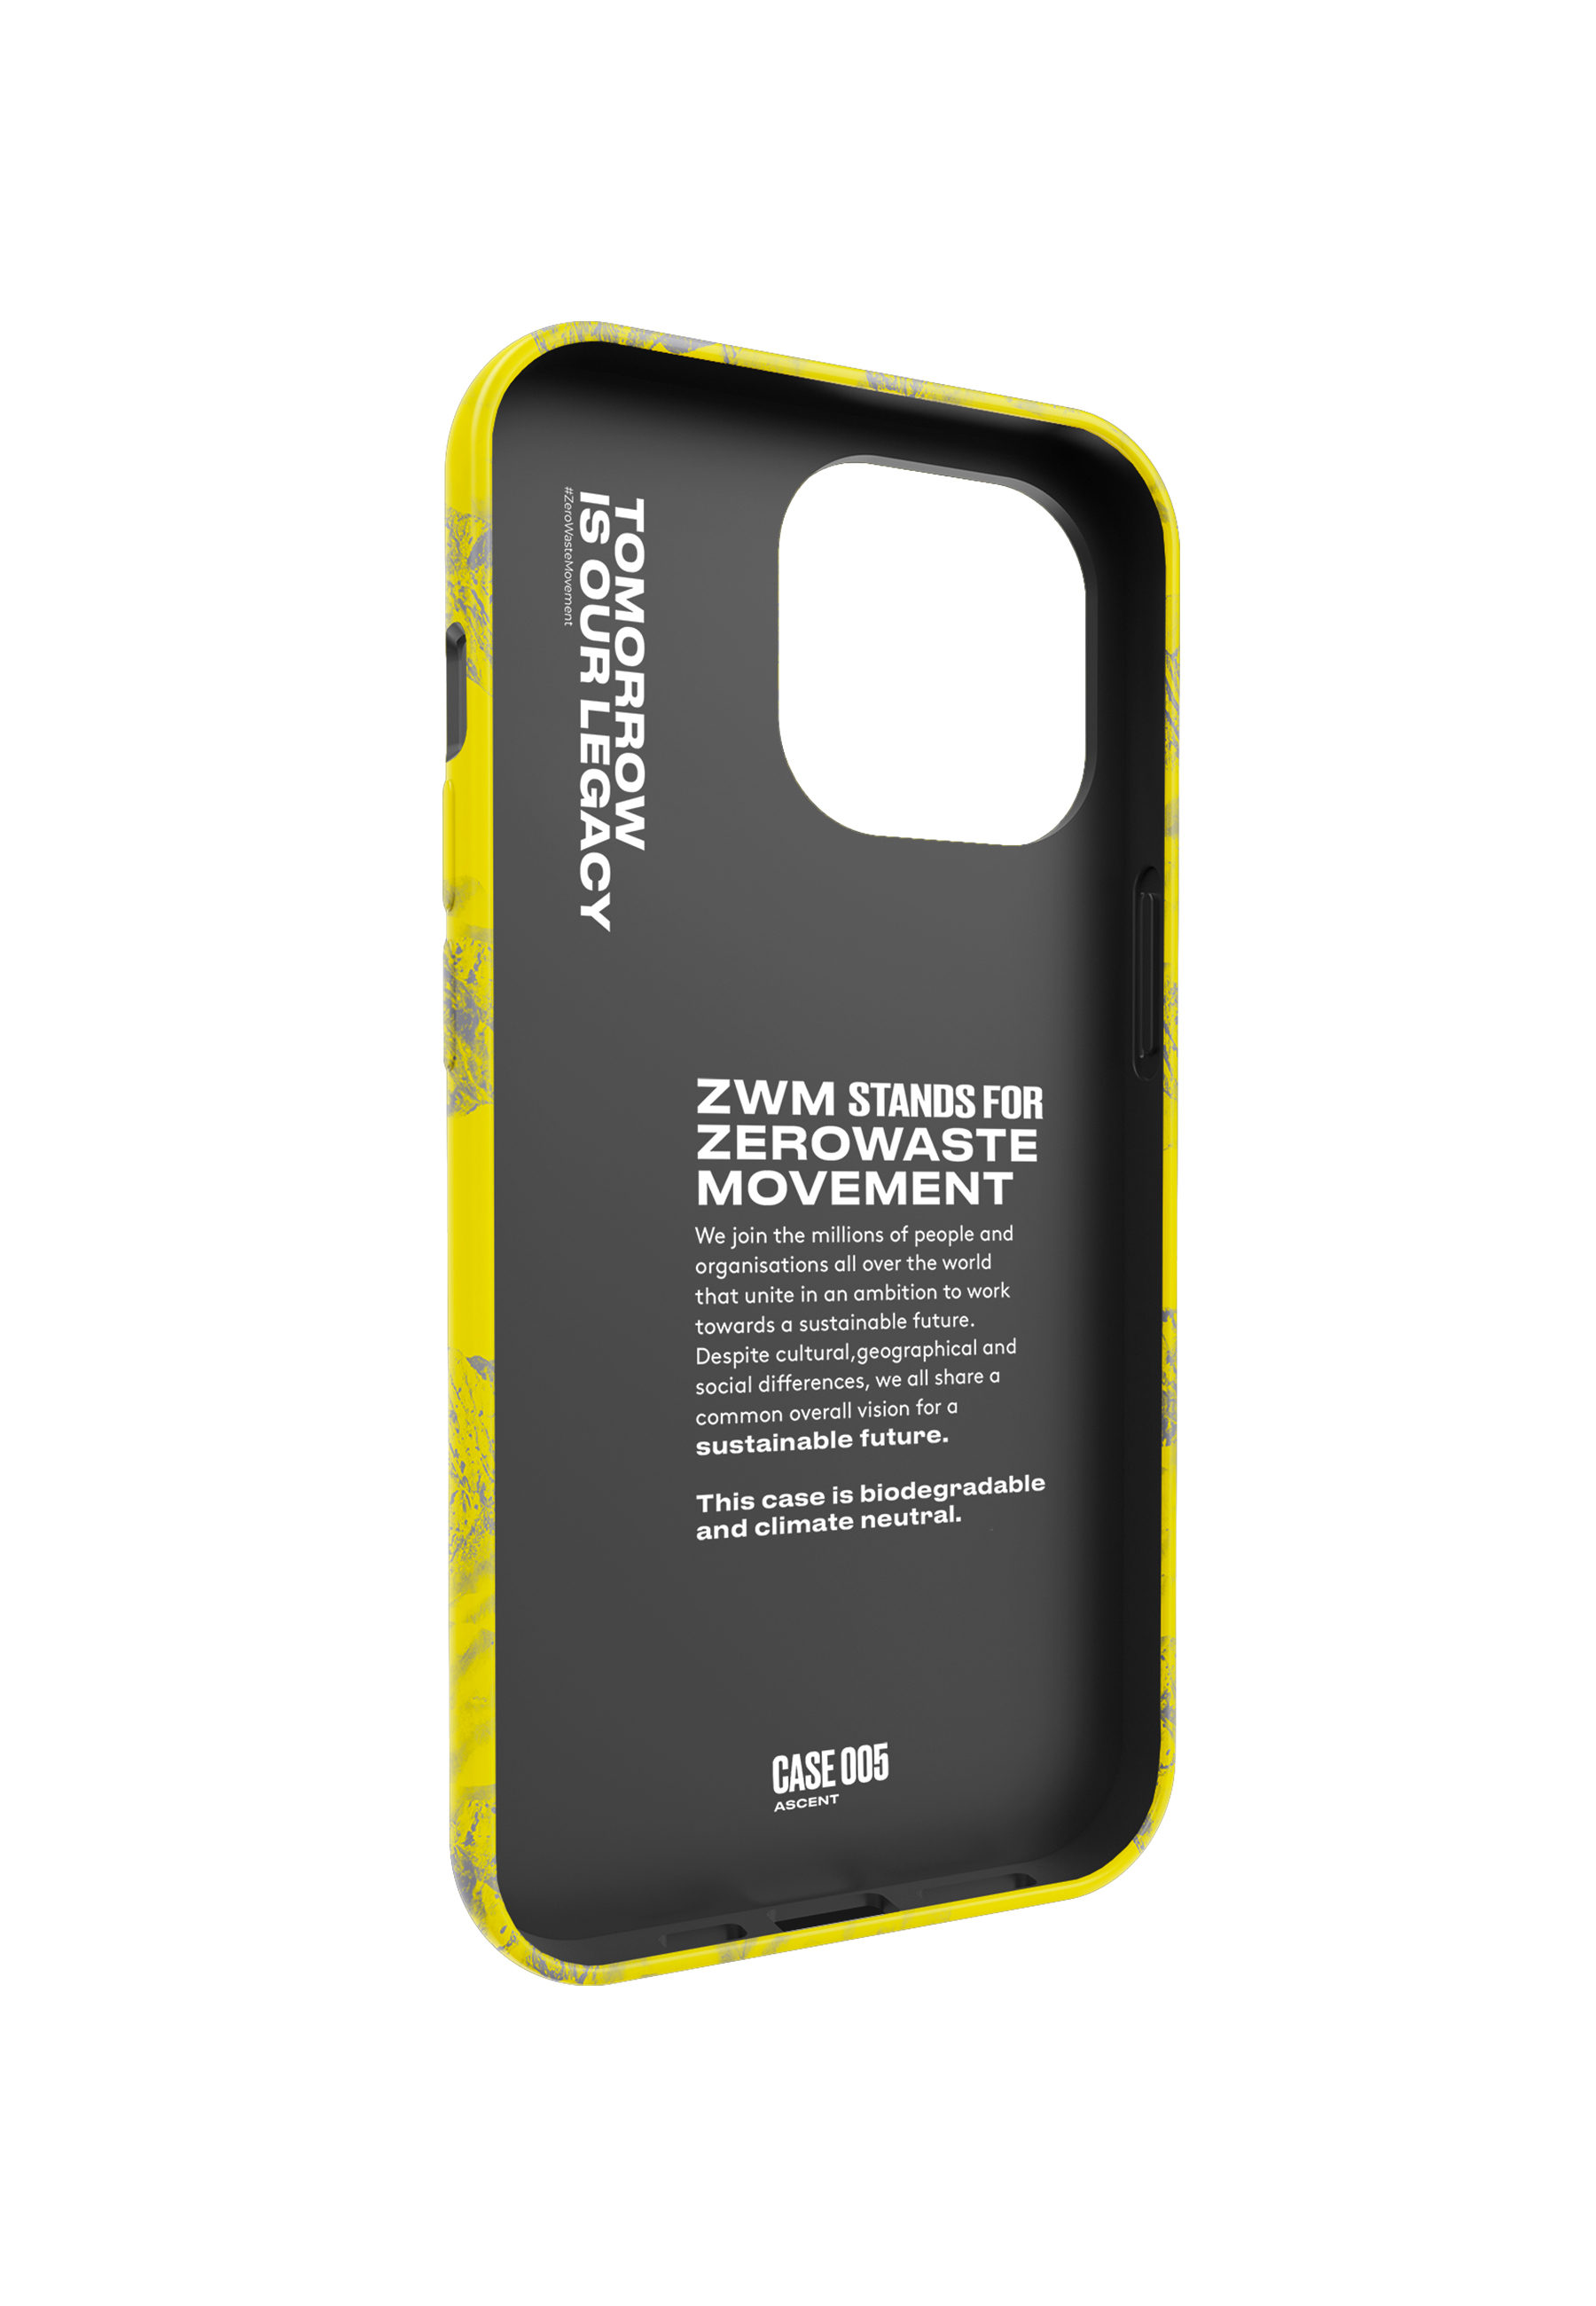 Pro, yellow/black iPhone 12/12 Apple, _13PM, ZWM Backcover,